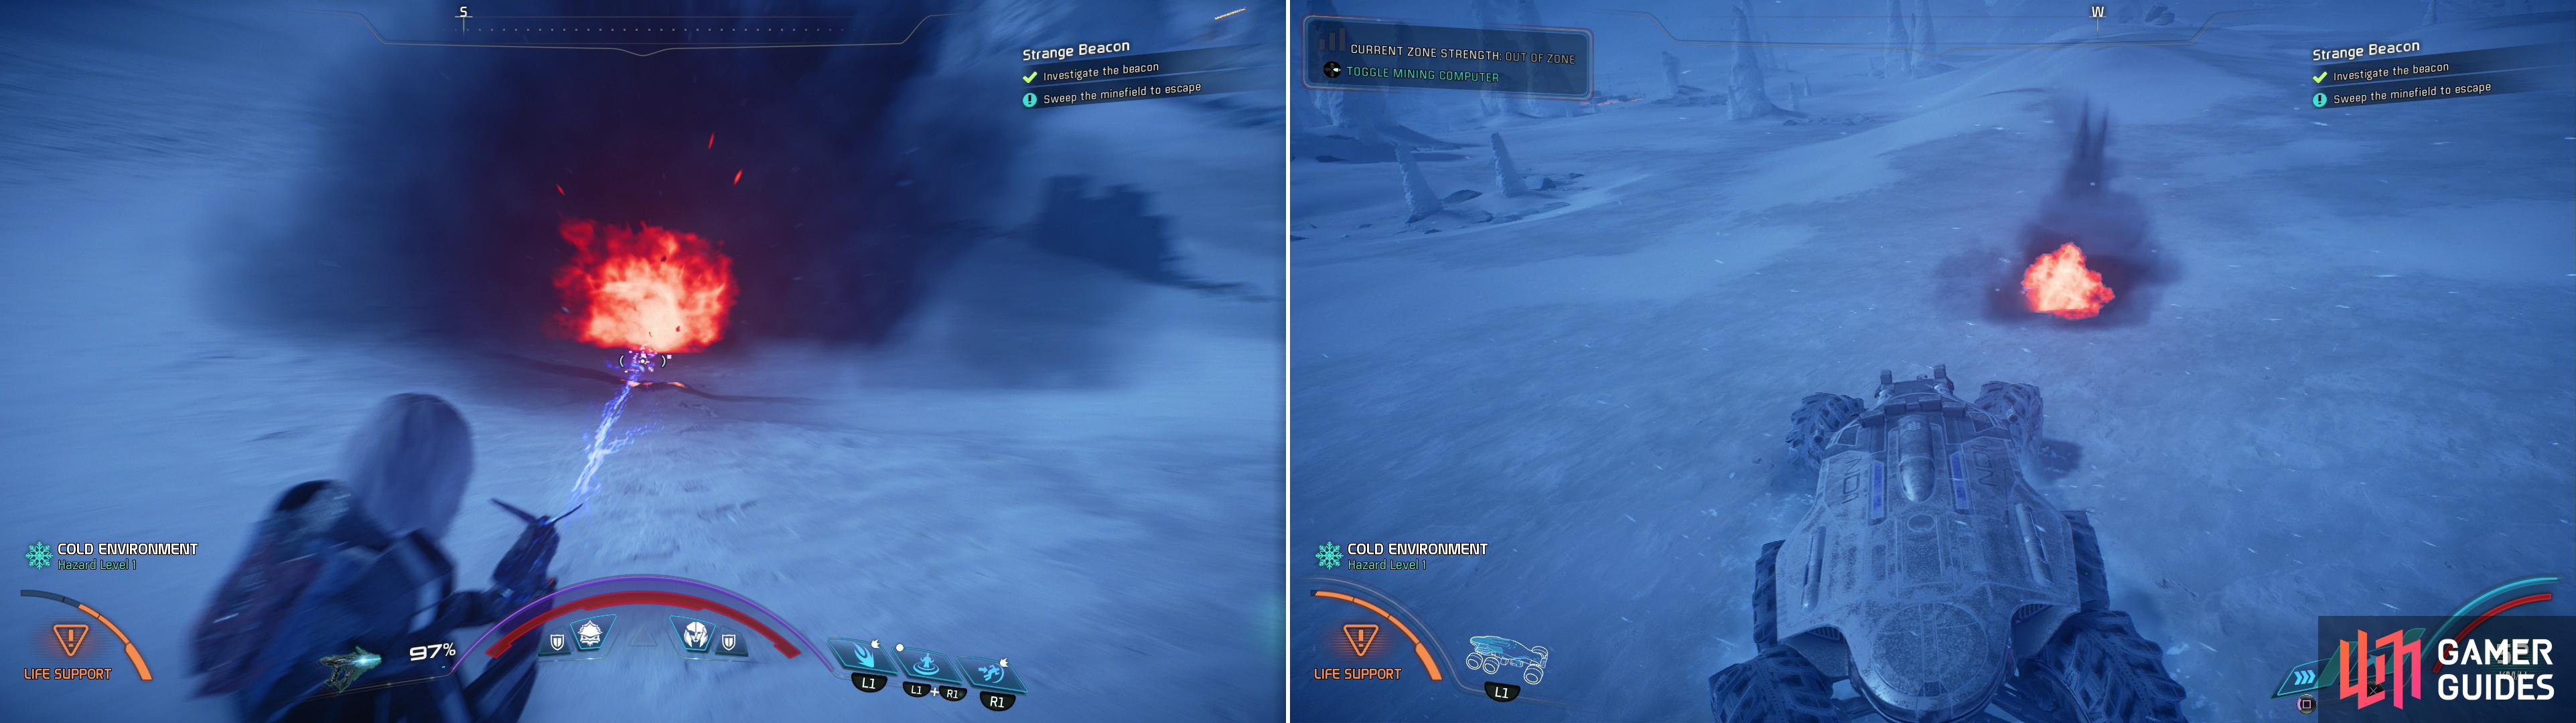 You can go around scanning and destroying mines (left), but it’s far simpler to just hop in the Nomad and drive away (right).